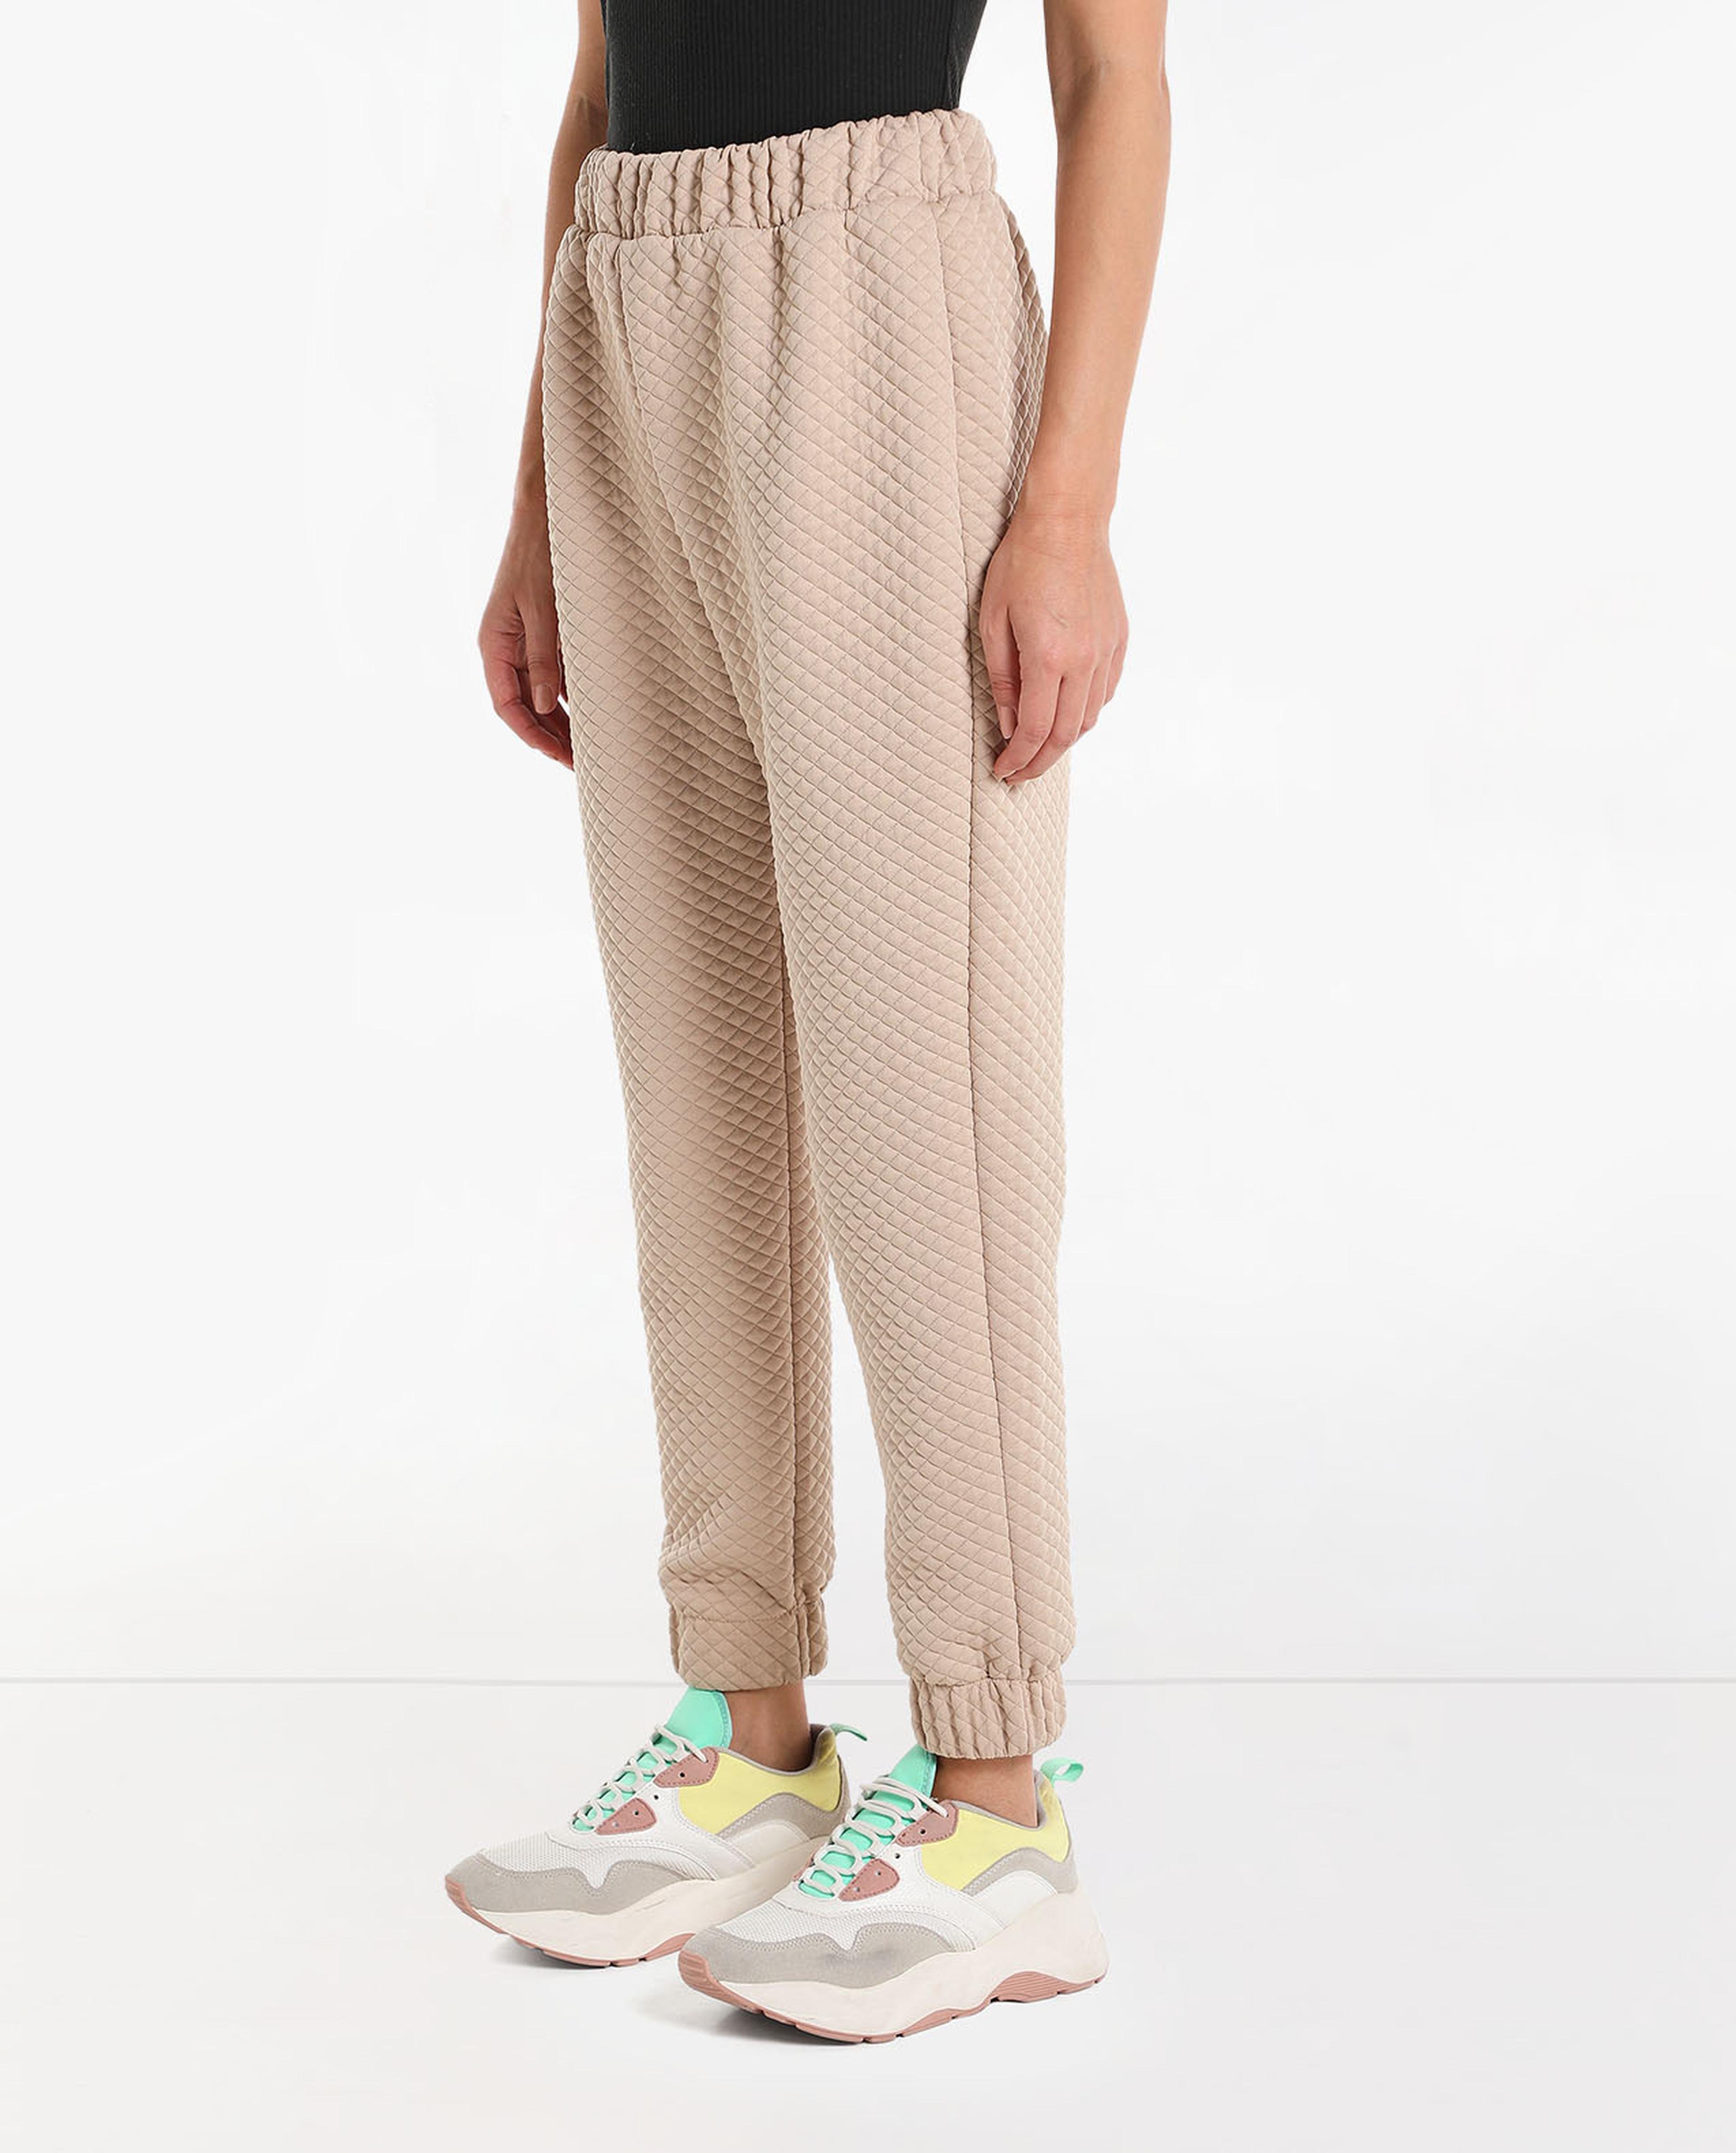 Self Knitted Jogger Style Pants with Elasticated Waist